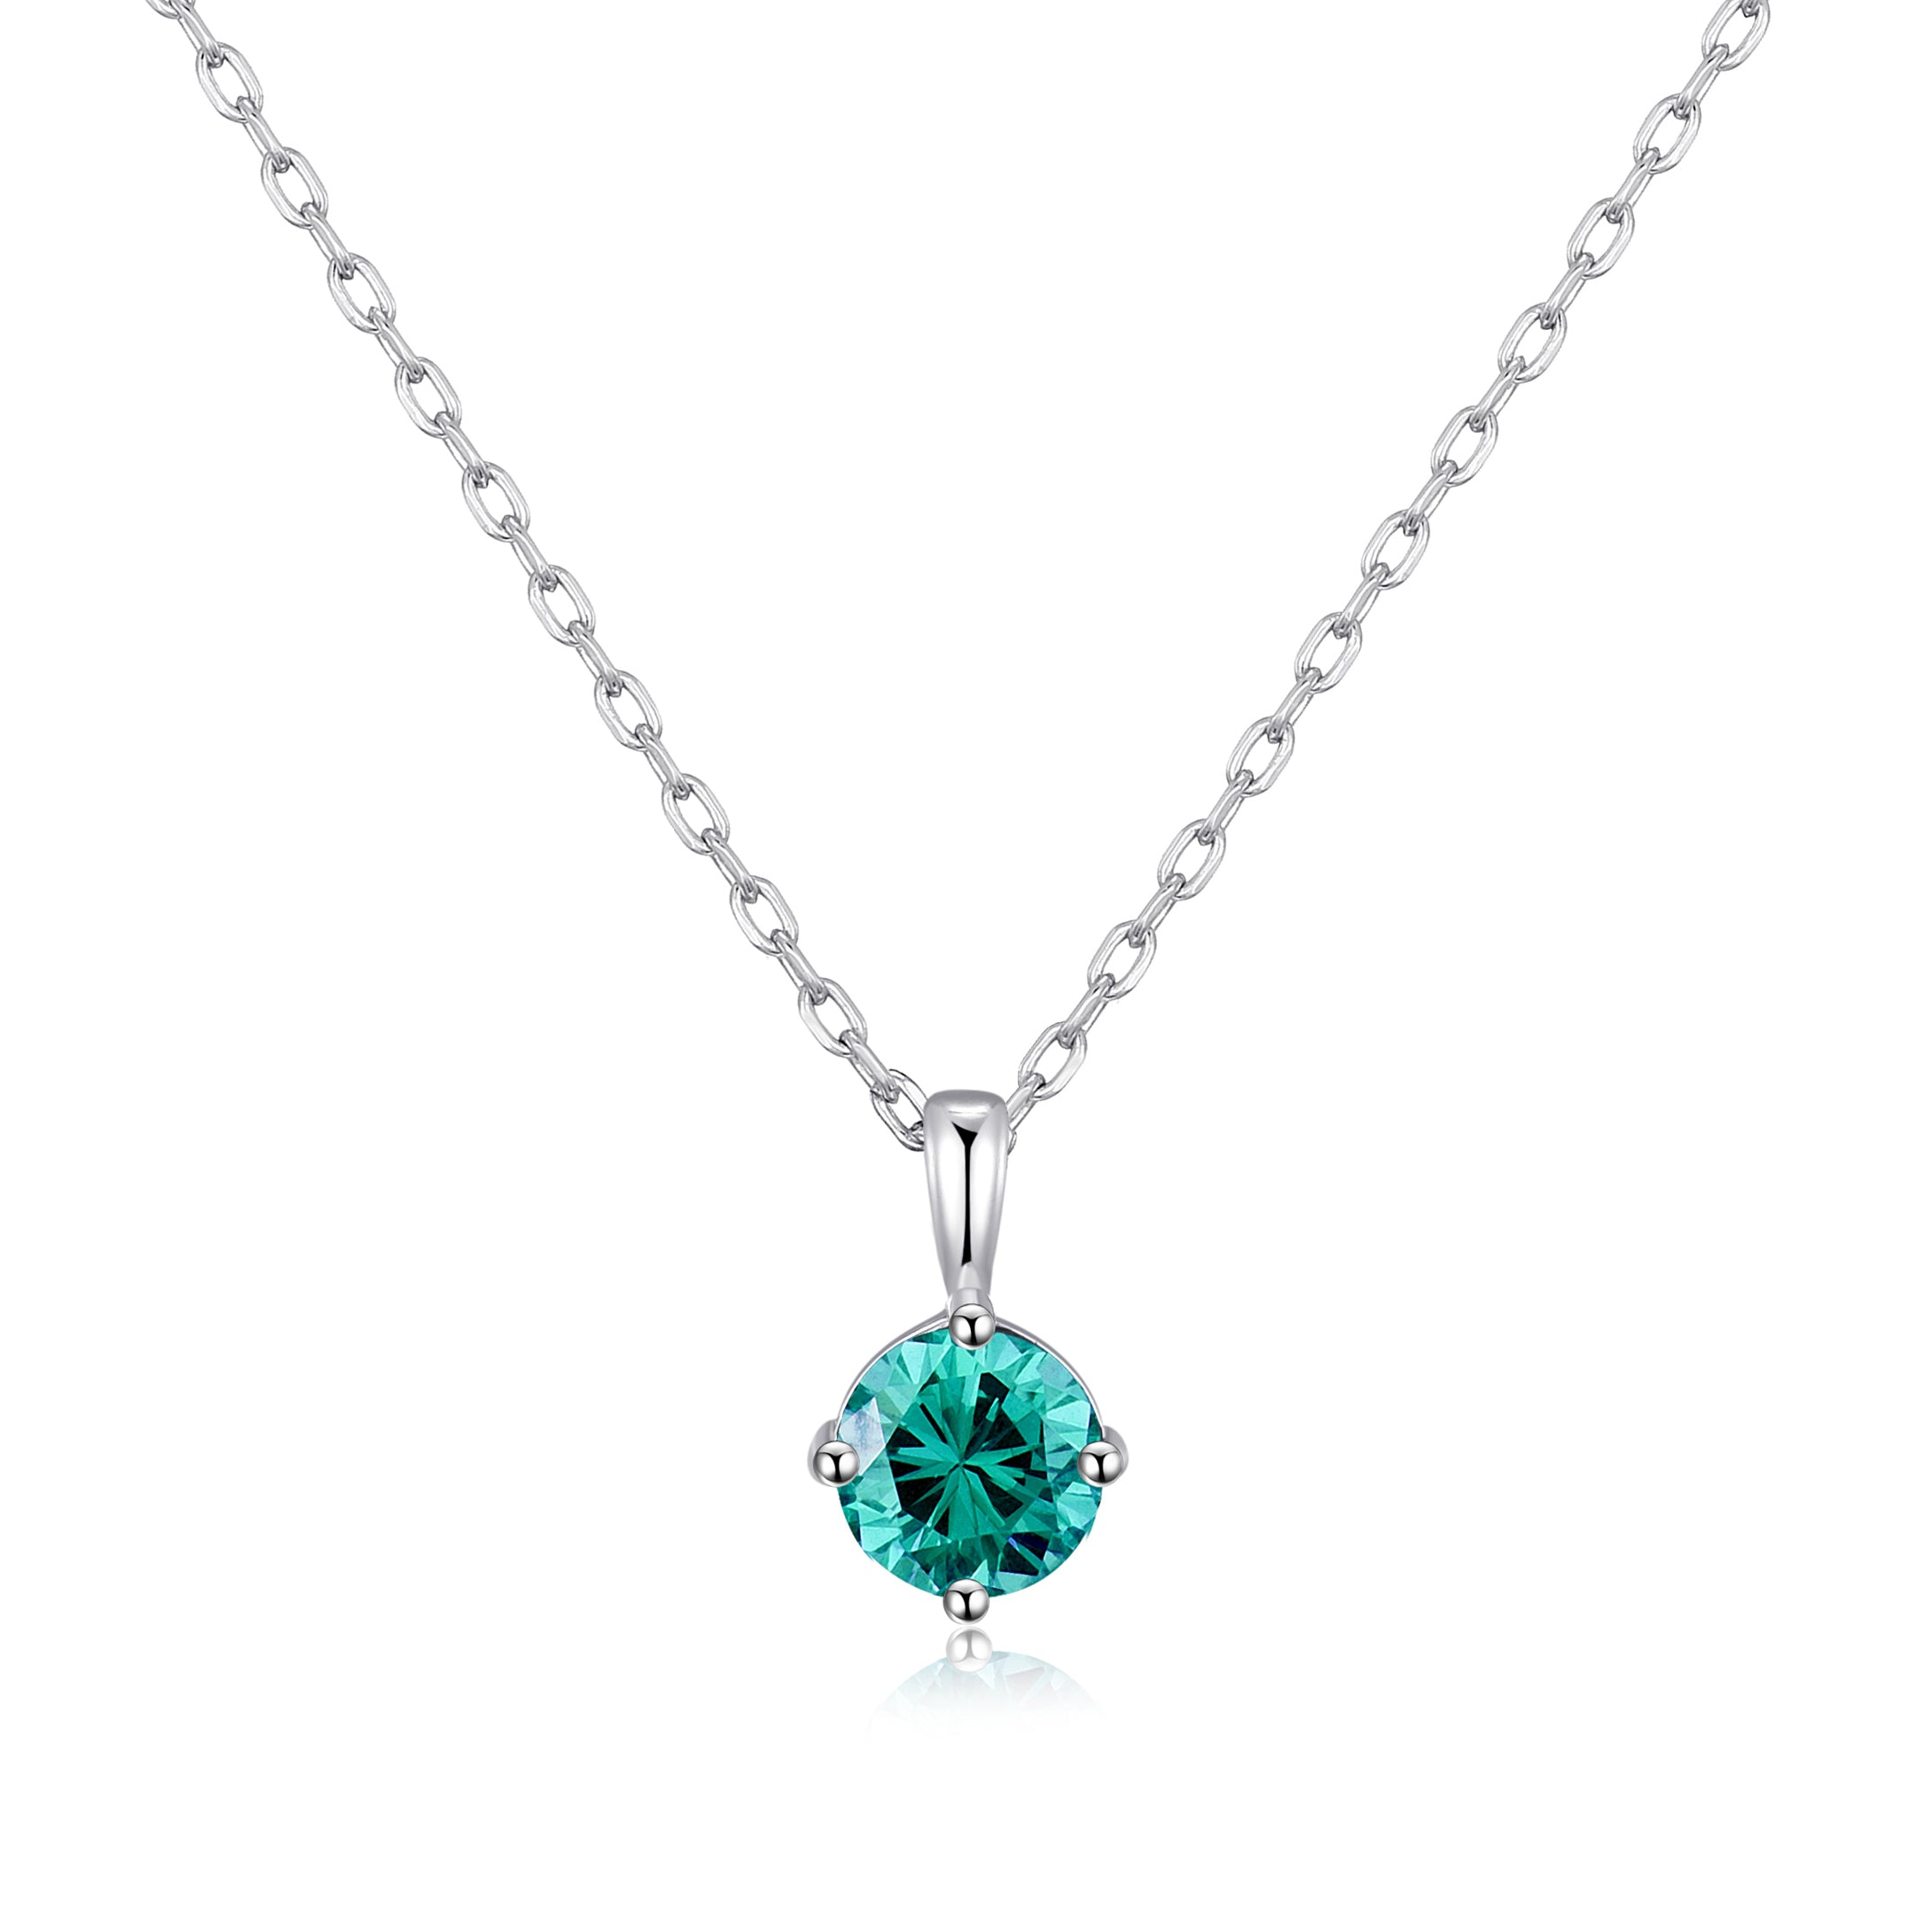 Sterling Silver December (Blue Topaz) Birthstone Necklace Created with Zircondia® Crystals by Philip Jones Jewellery